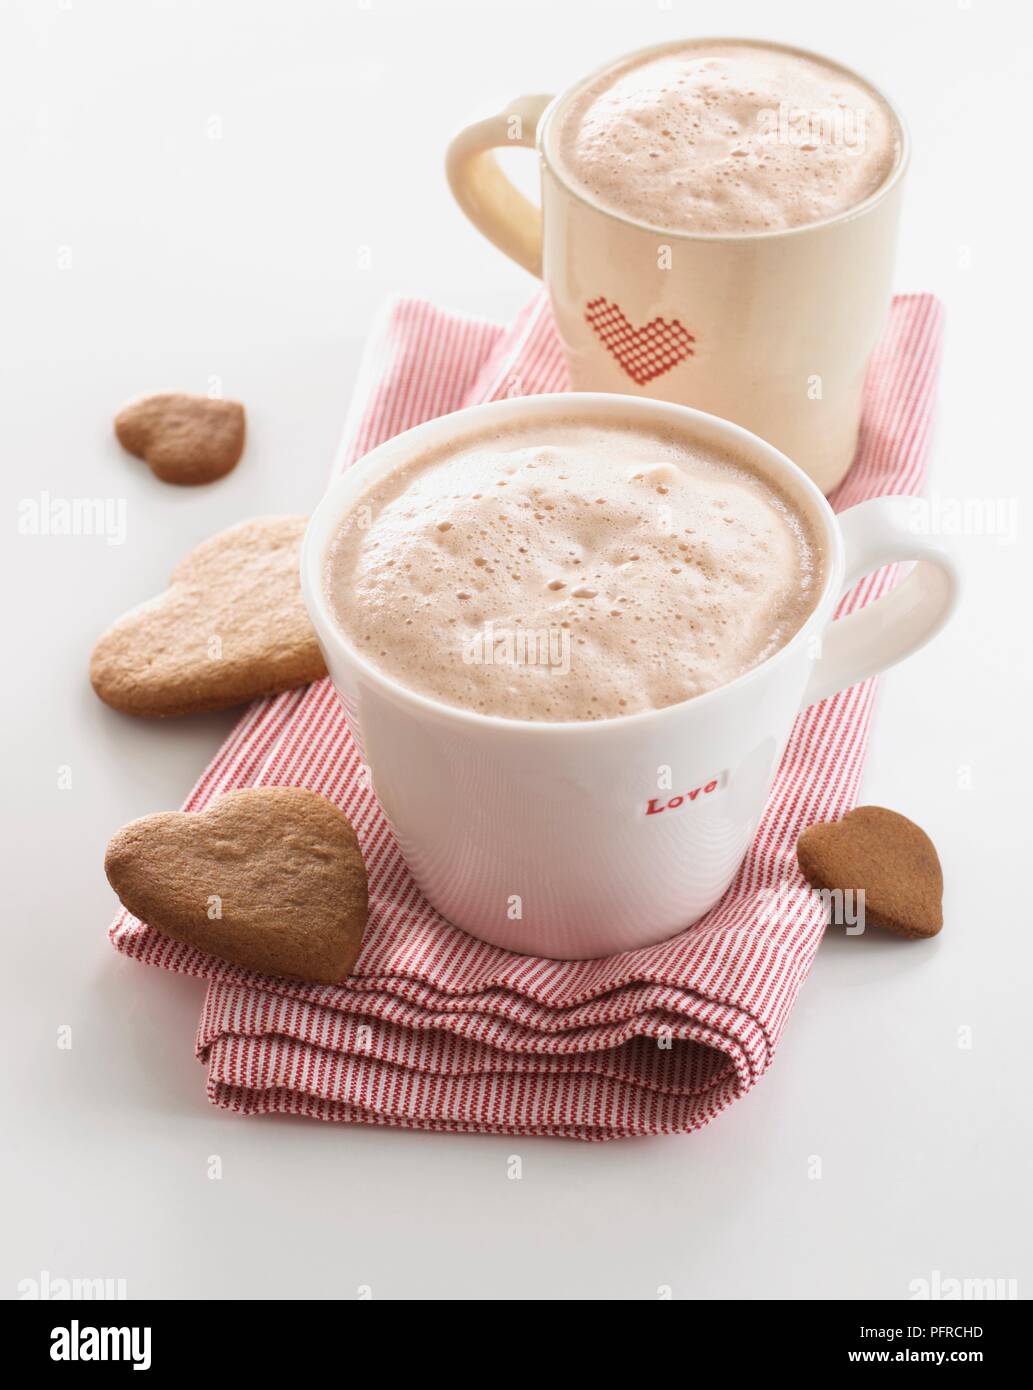 Two mugs of cappuccino on napkin with heart shape biscuits Stock Photo